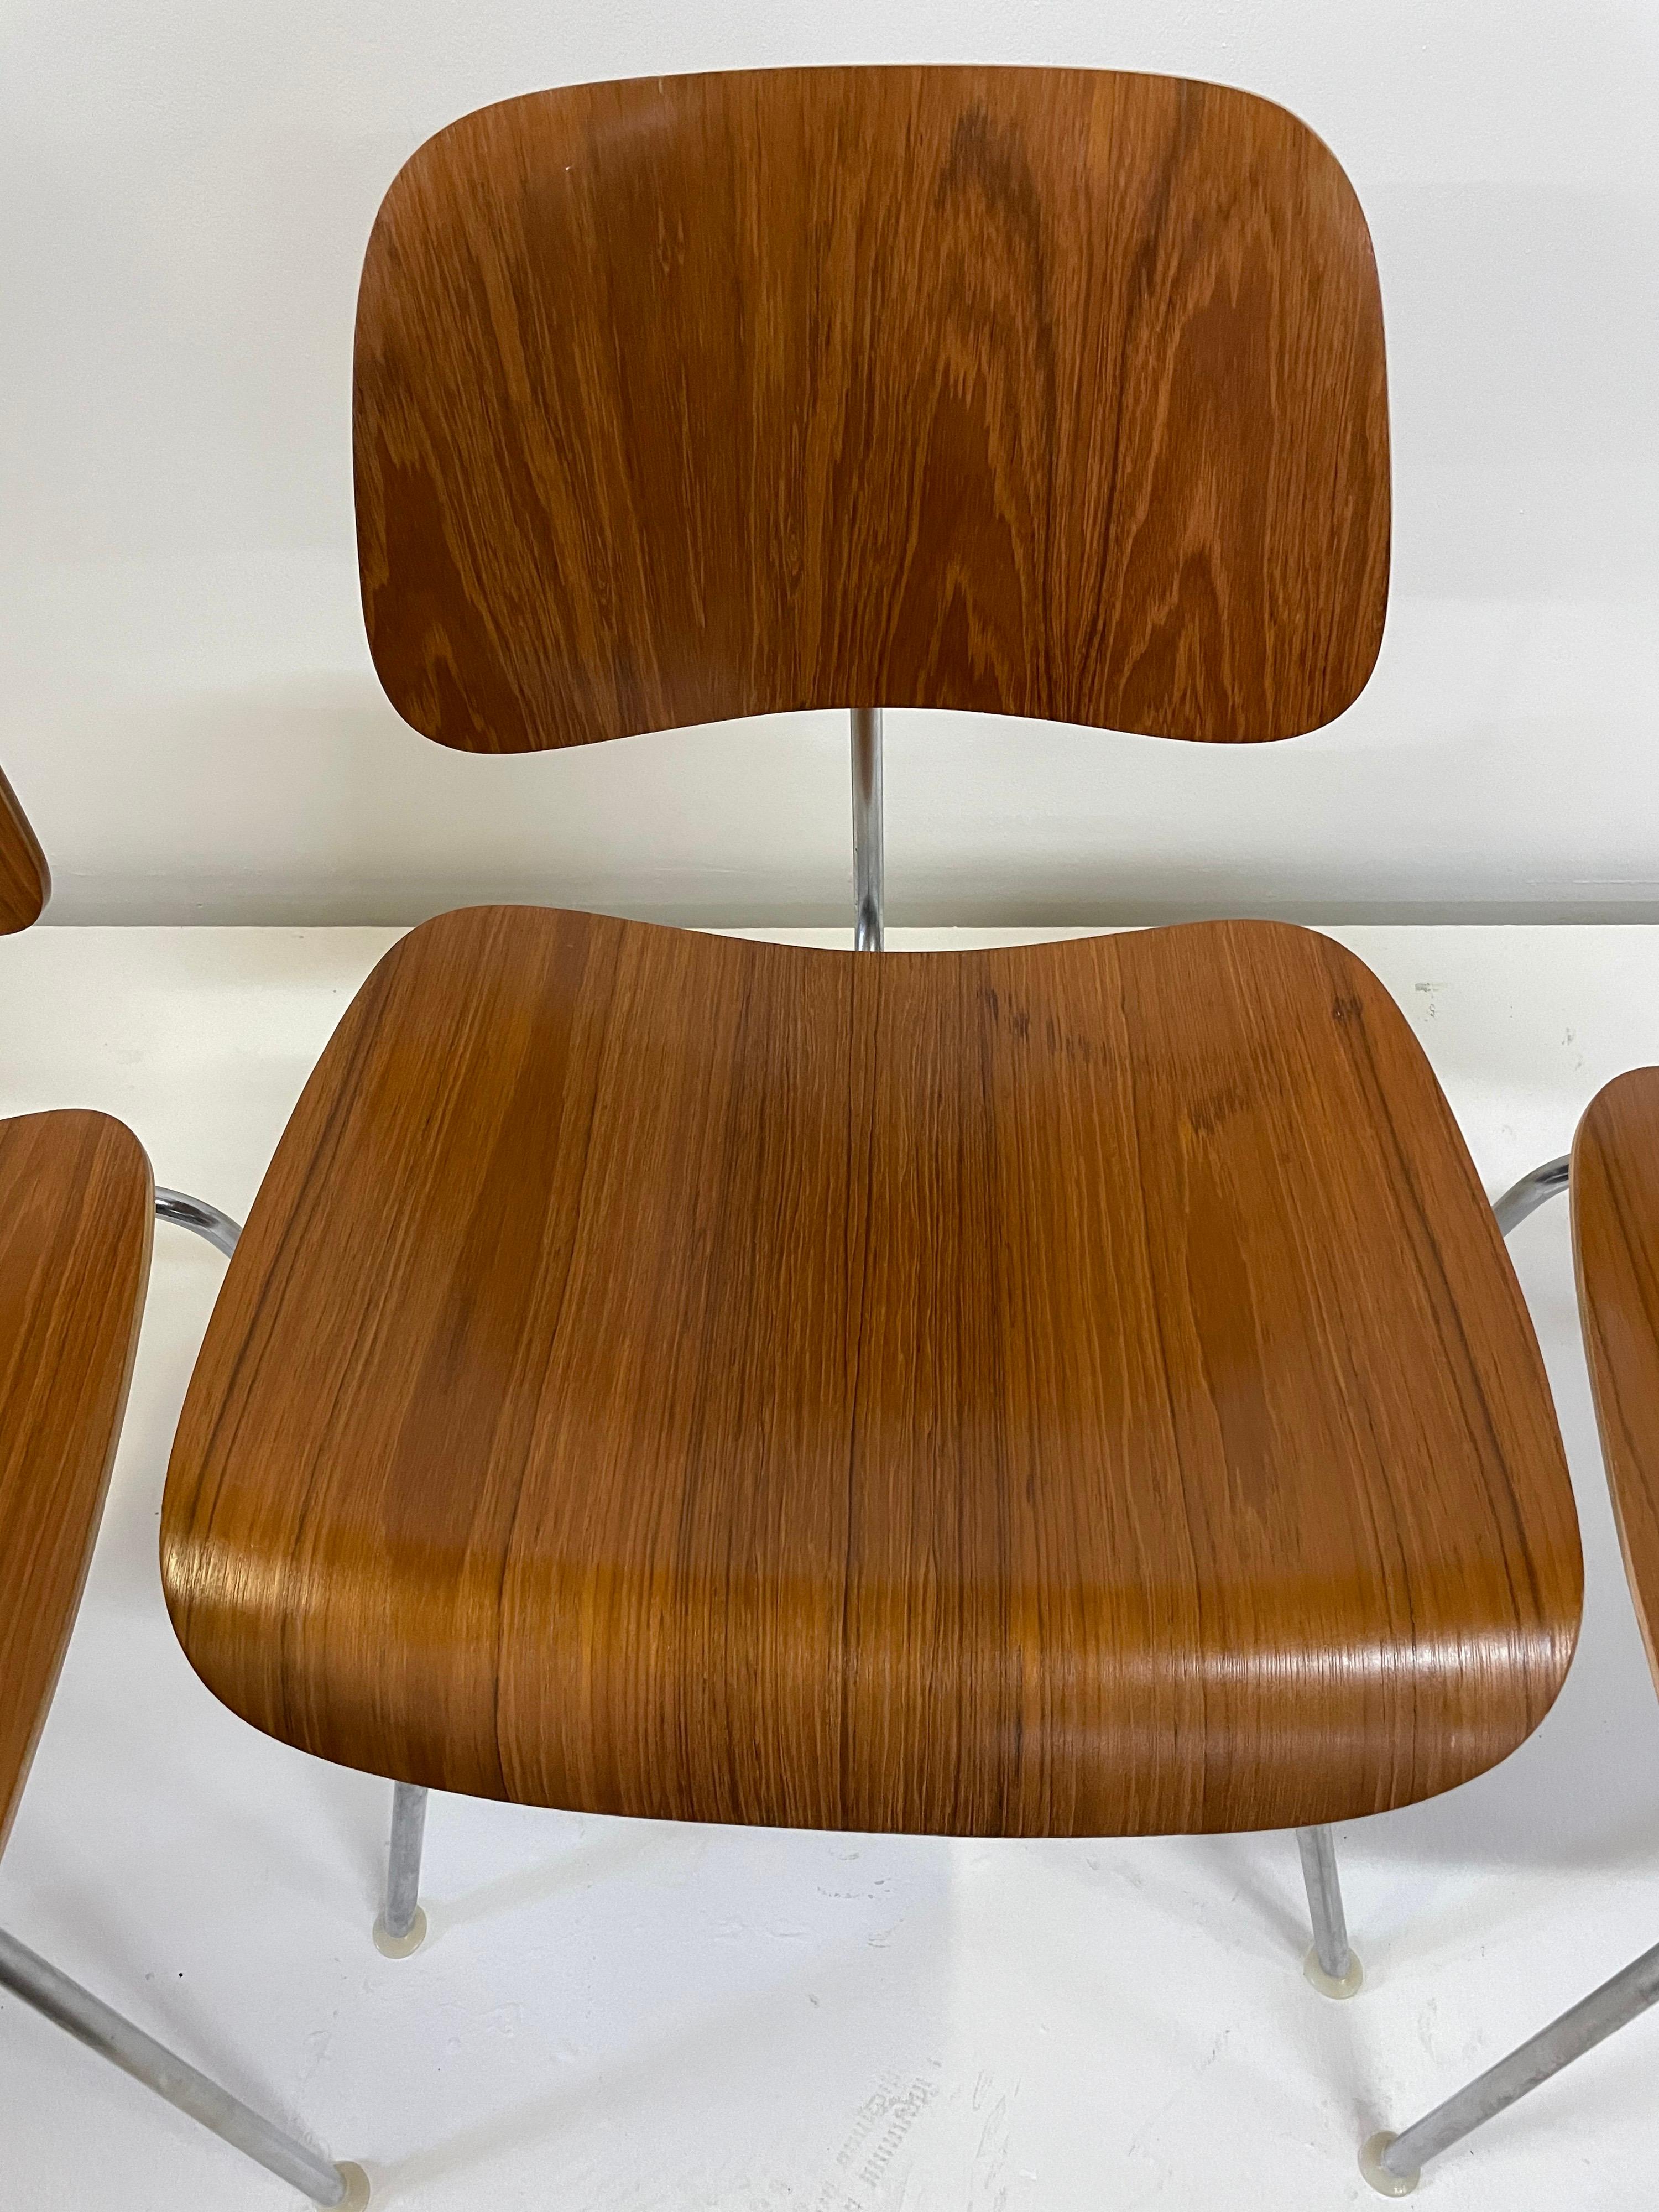 Rare Early Set of Charles and Ray Eames for Herman Miller Chairs in Zebrawood For Sale 8